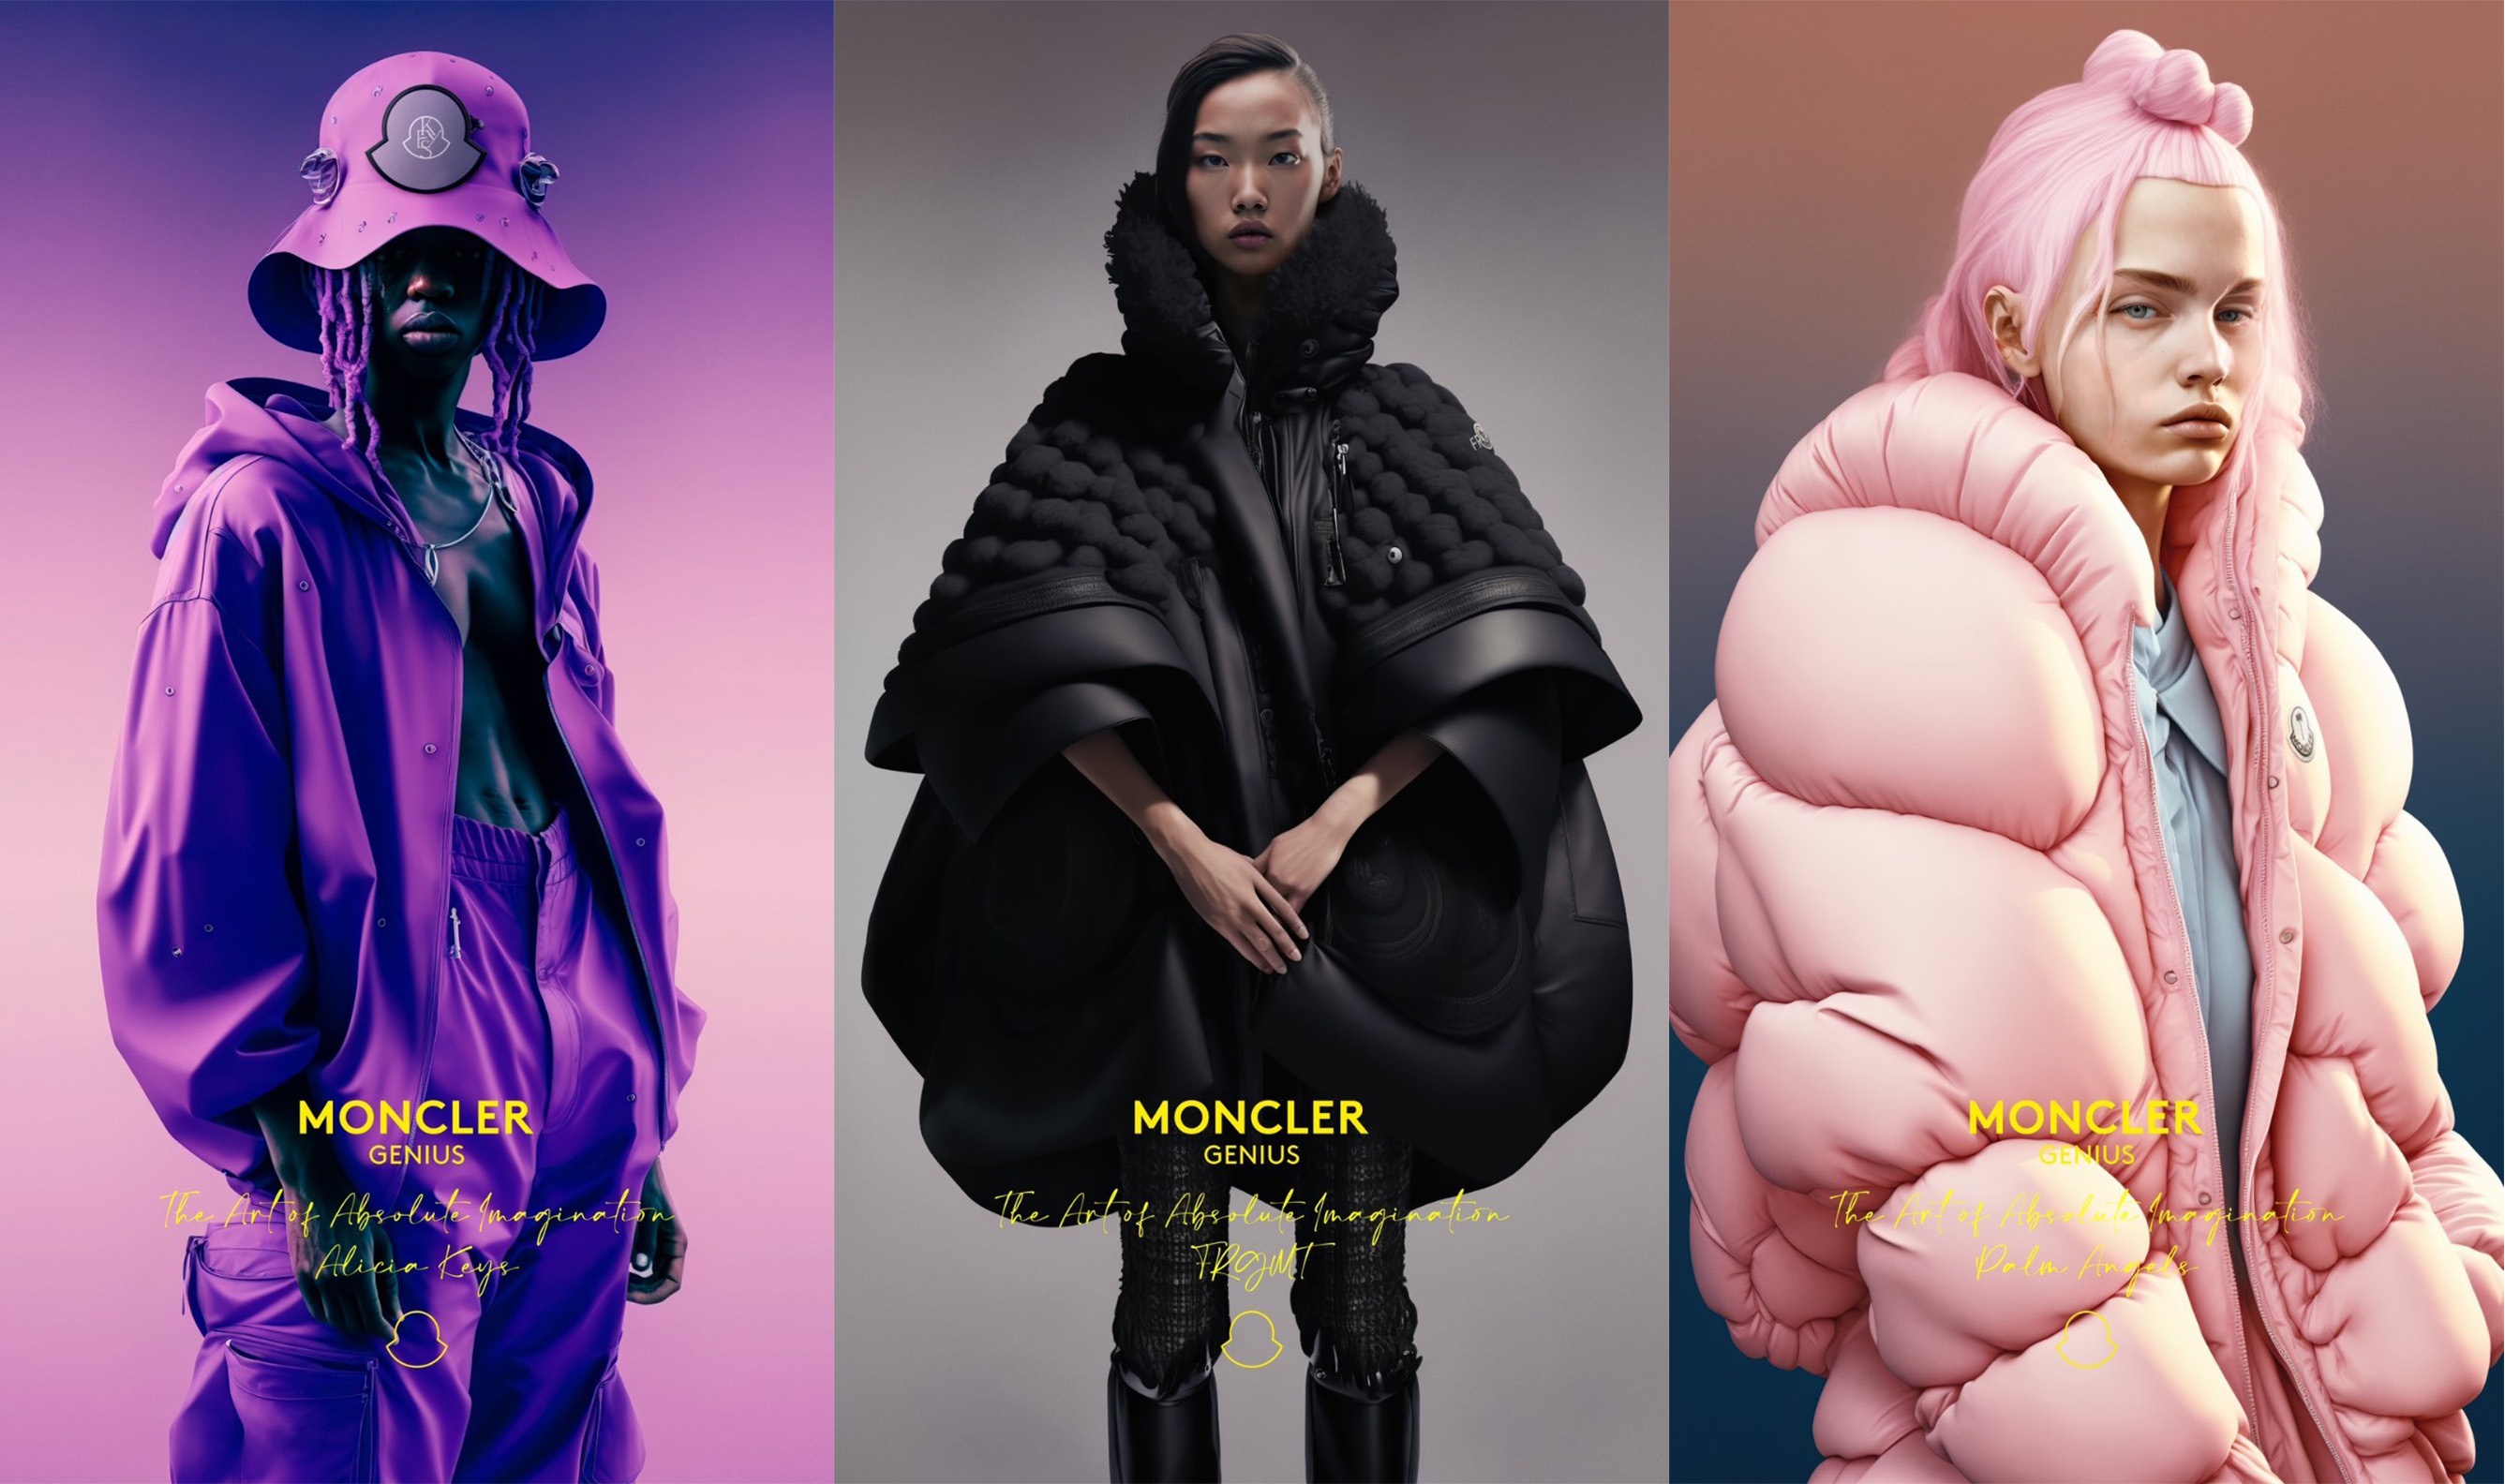 Maison Meta and creative agency WeSayHi used AI to generate campaign imagery for Moncler Genius in 2023. Image: Maison Meta